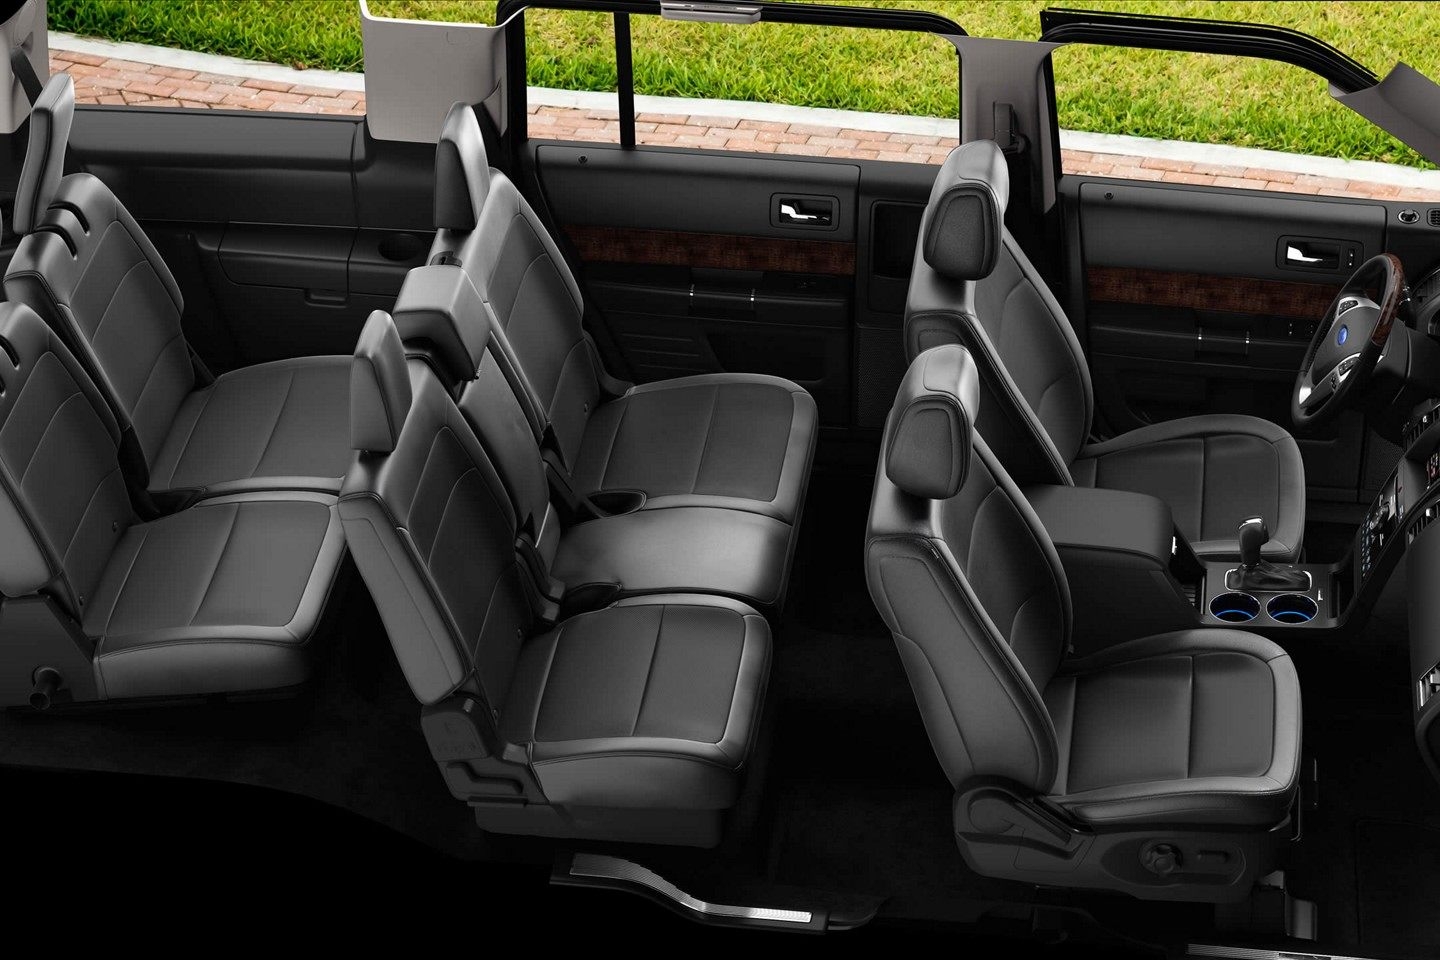 Does The 2019 Ford Flex Have 3rd Row Seating